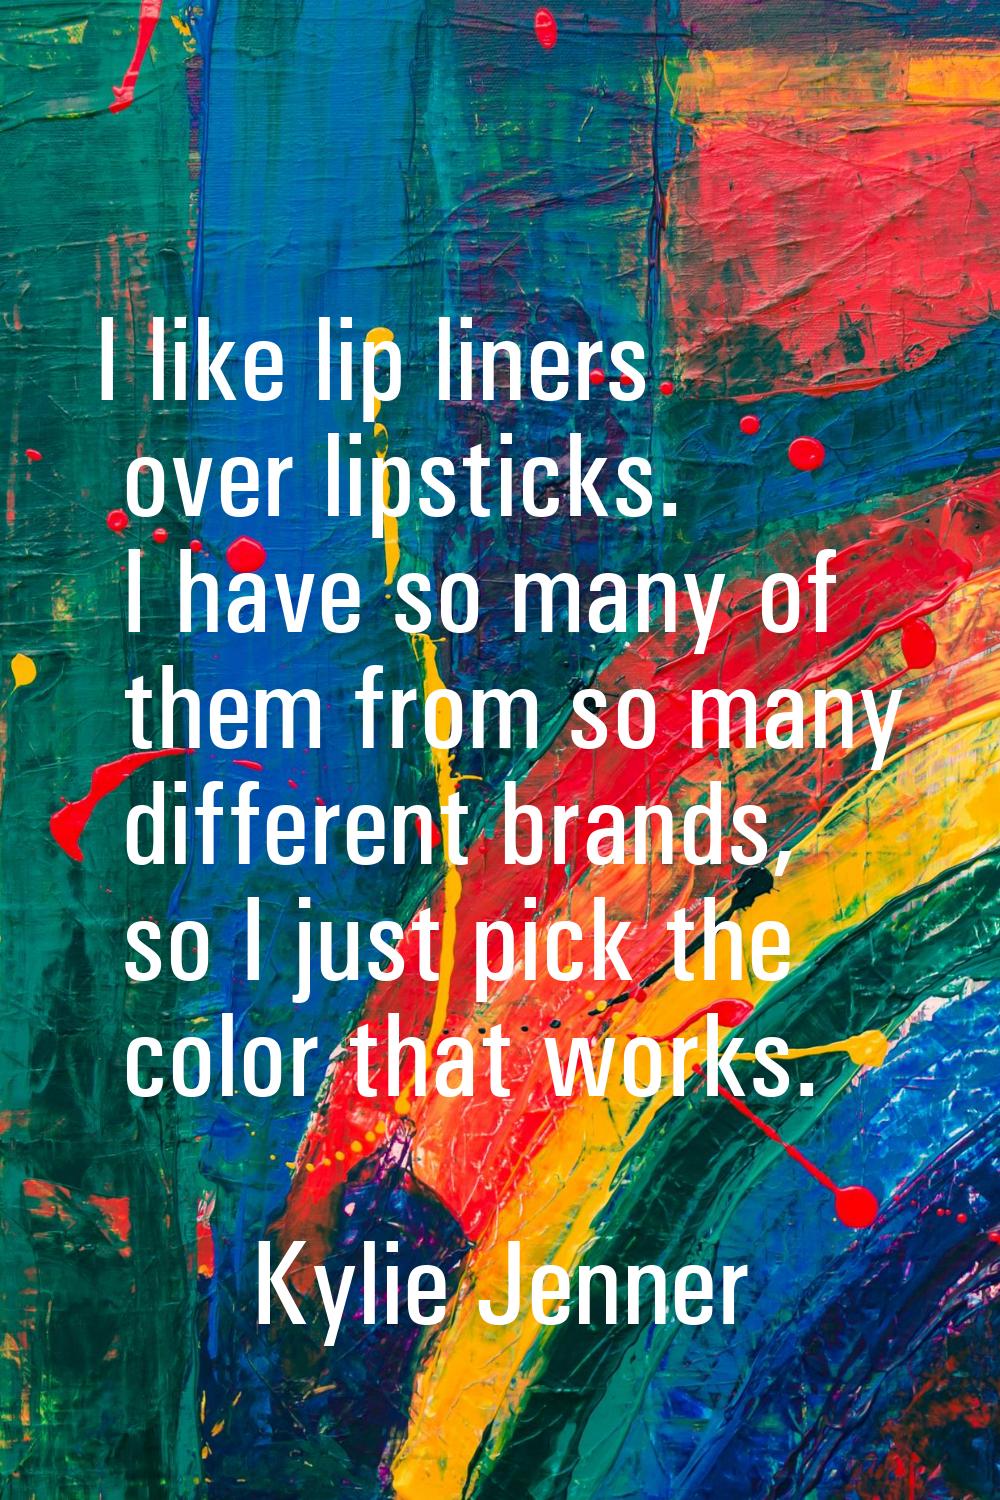 I like lip liners over lipsticks. I have so many of them from so many different brands, so I just p